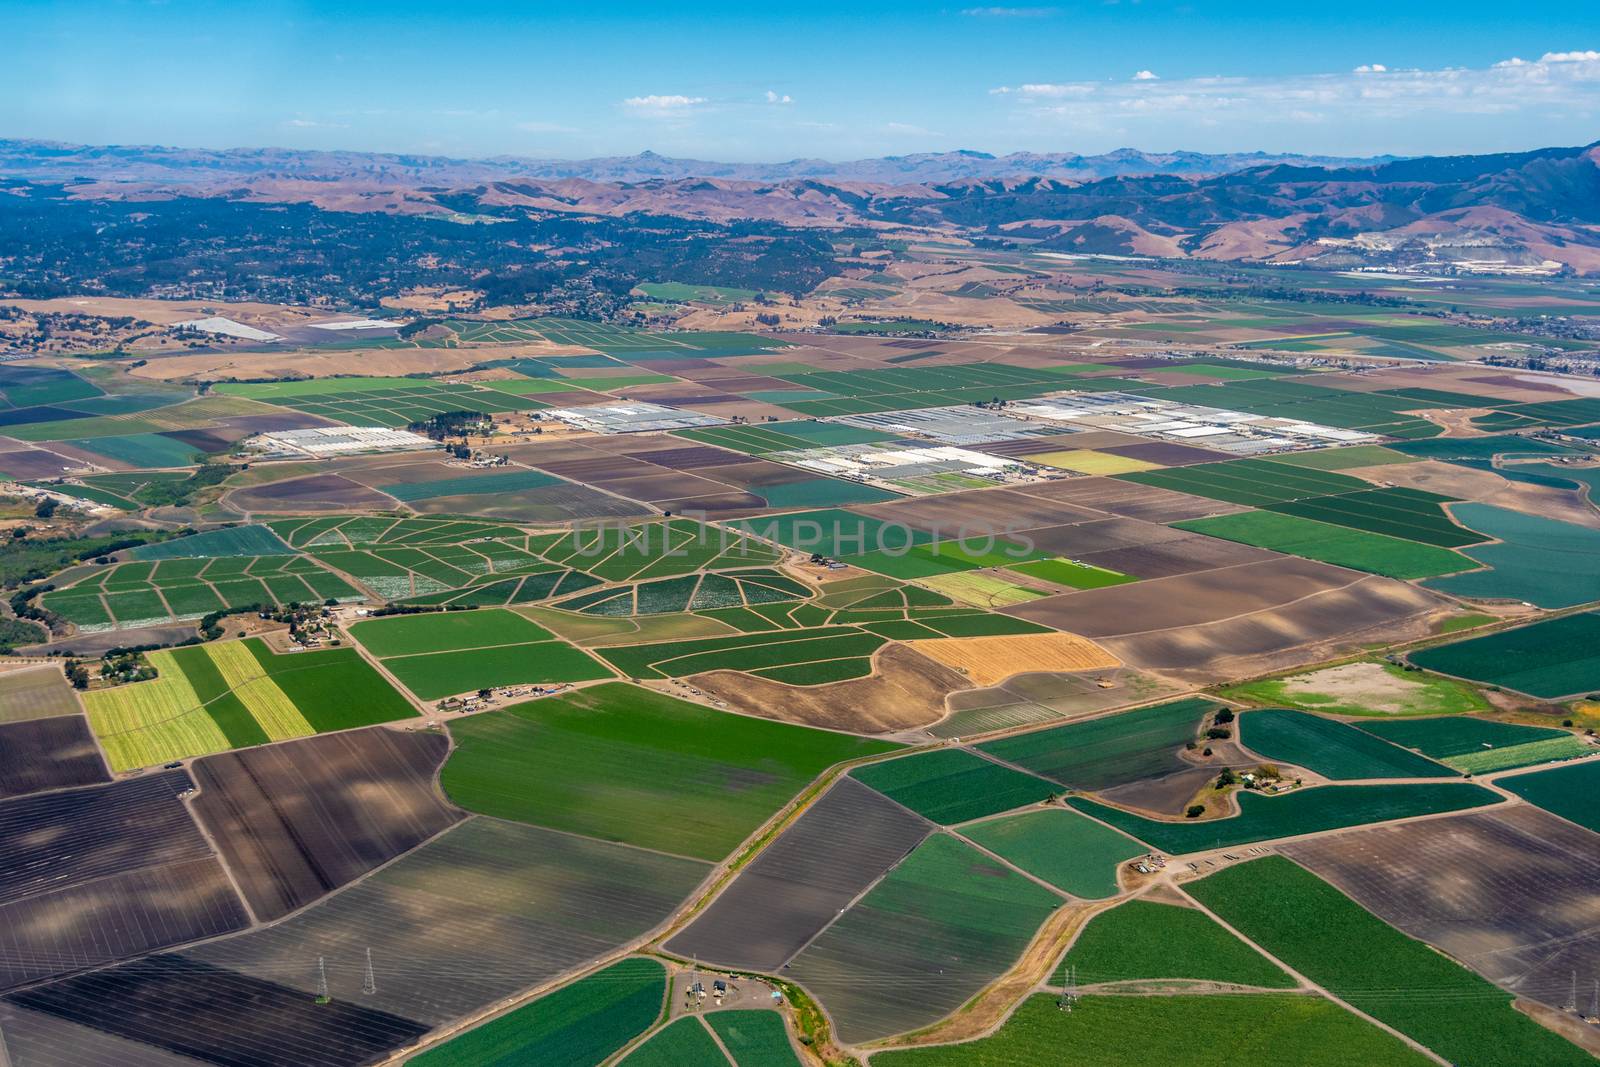 Pacific coast of California with farmland close to the cities of Salinas and Monterey. The picture was taken in the early July.